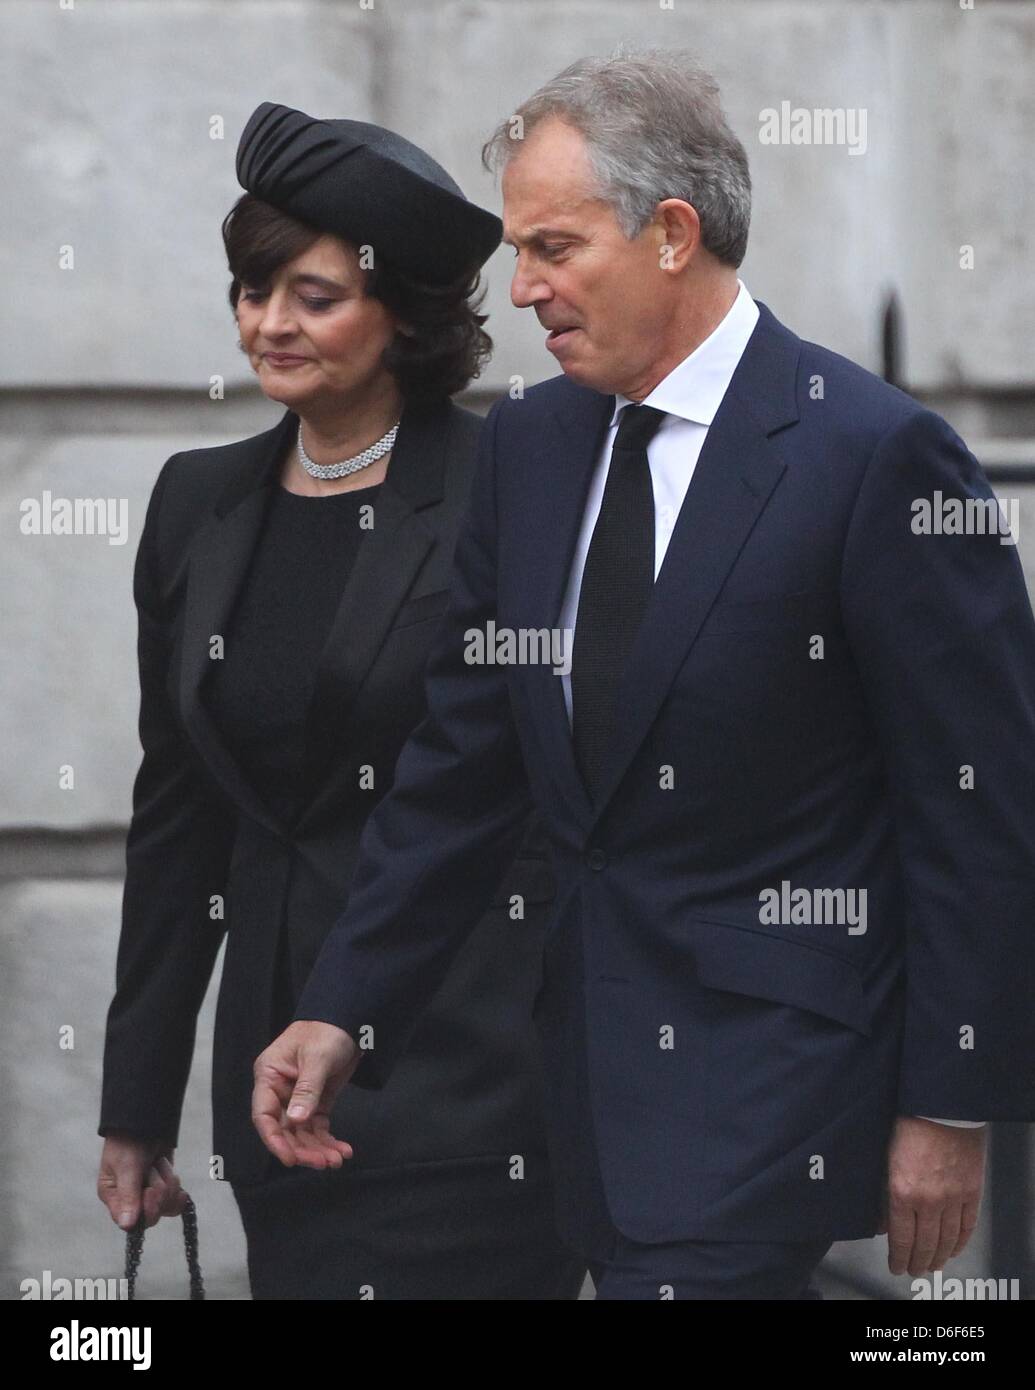 London, UK. 17th April, 2013. Tony Blair and his wife Cherie arrive at Margaret Thatcher's funeral at St Paul's Cathedral in Central London. Dignitaries from around the world joined Queen Elizabeth II and Prince Philip, Duke of Edinburgh as the United Kingdom pays tribute to former Prime Minister Thatcher Baroness Thatcher during a Ceremonial funeral with military honours at St Paul's Cathedral. Lady Thatcher, who died last week, was the first British female Prime Minister and served from 1979 to 1990. Stock Photo